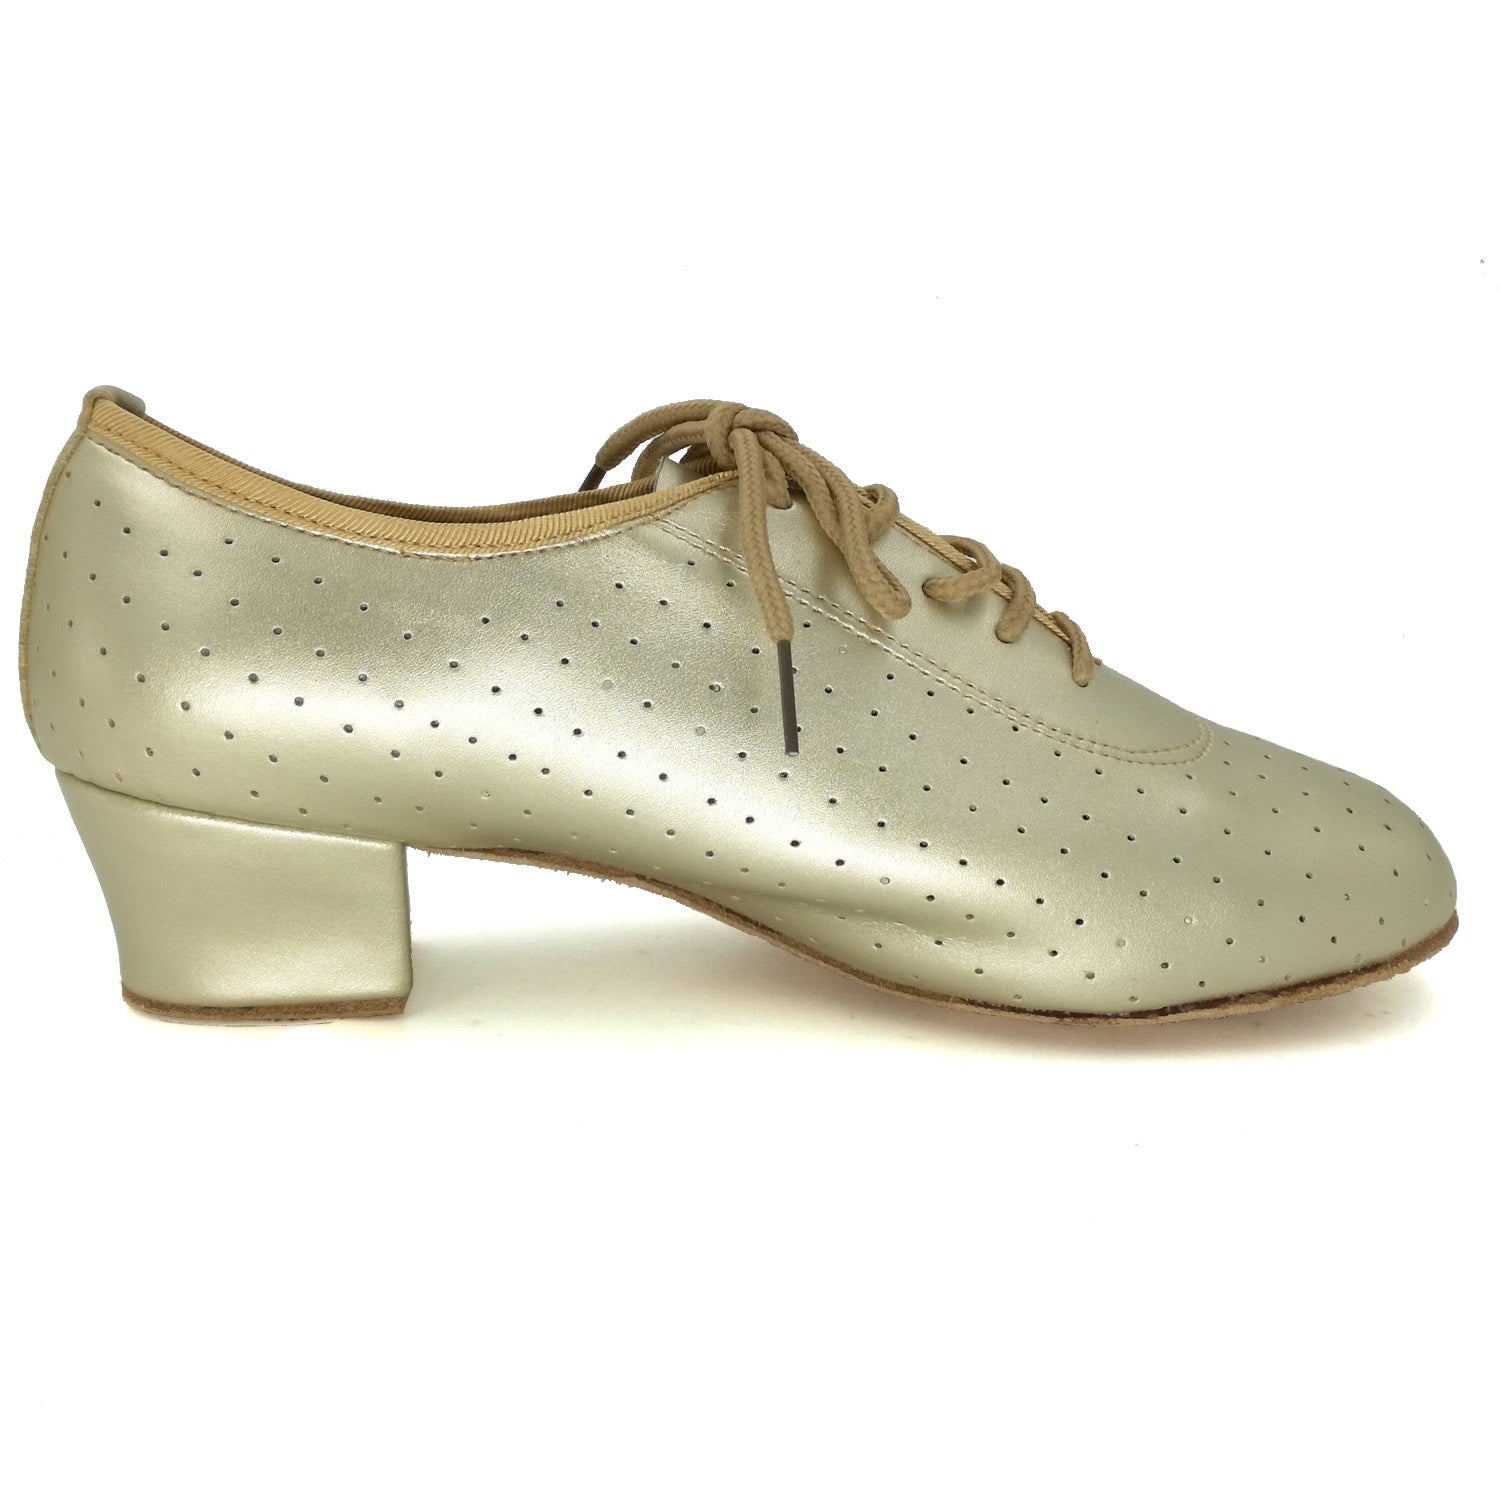 Women Ballroom Dancing Shoes with Suede Sole Lace-up Closed-toe in Gold for Tango Latin Practice (PD5002D)2